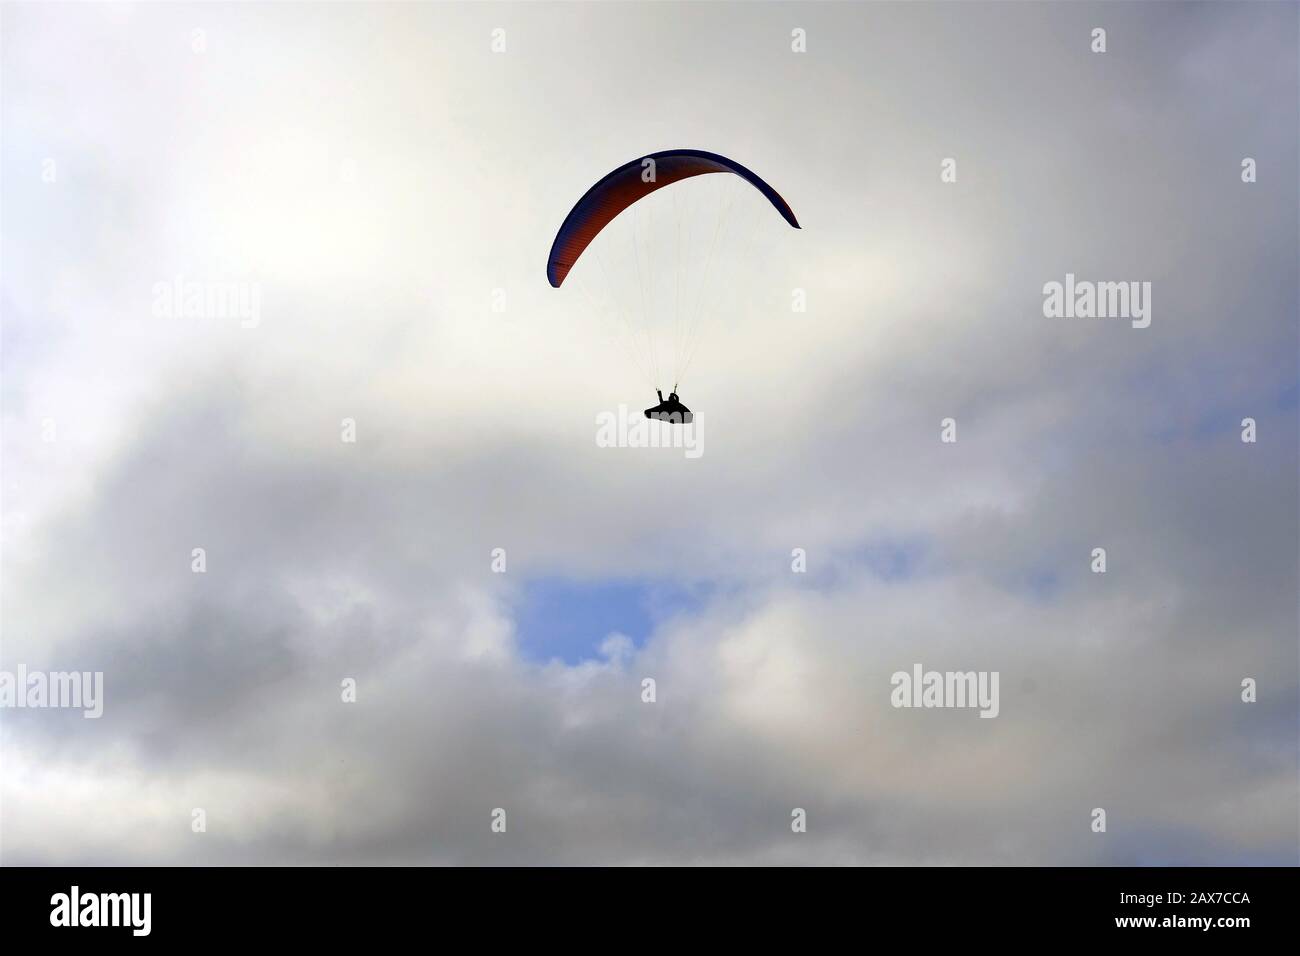 silhouette of a paraglyding man against white clouds in the sky in Malta Stock Photo